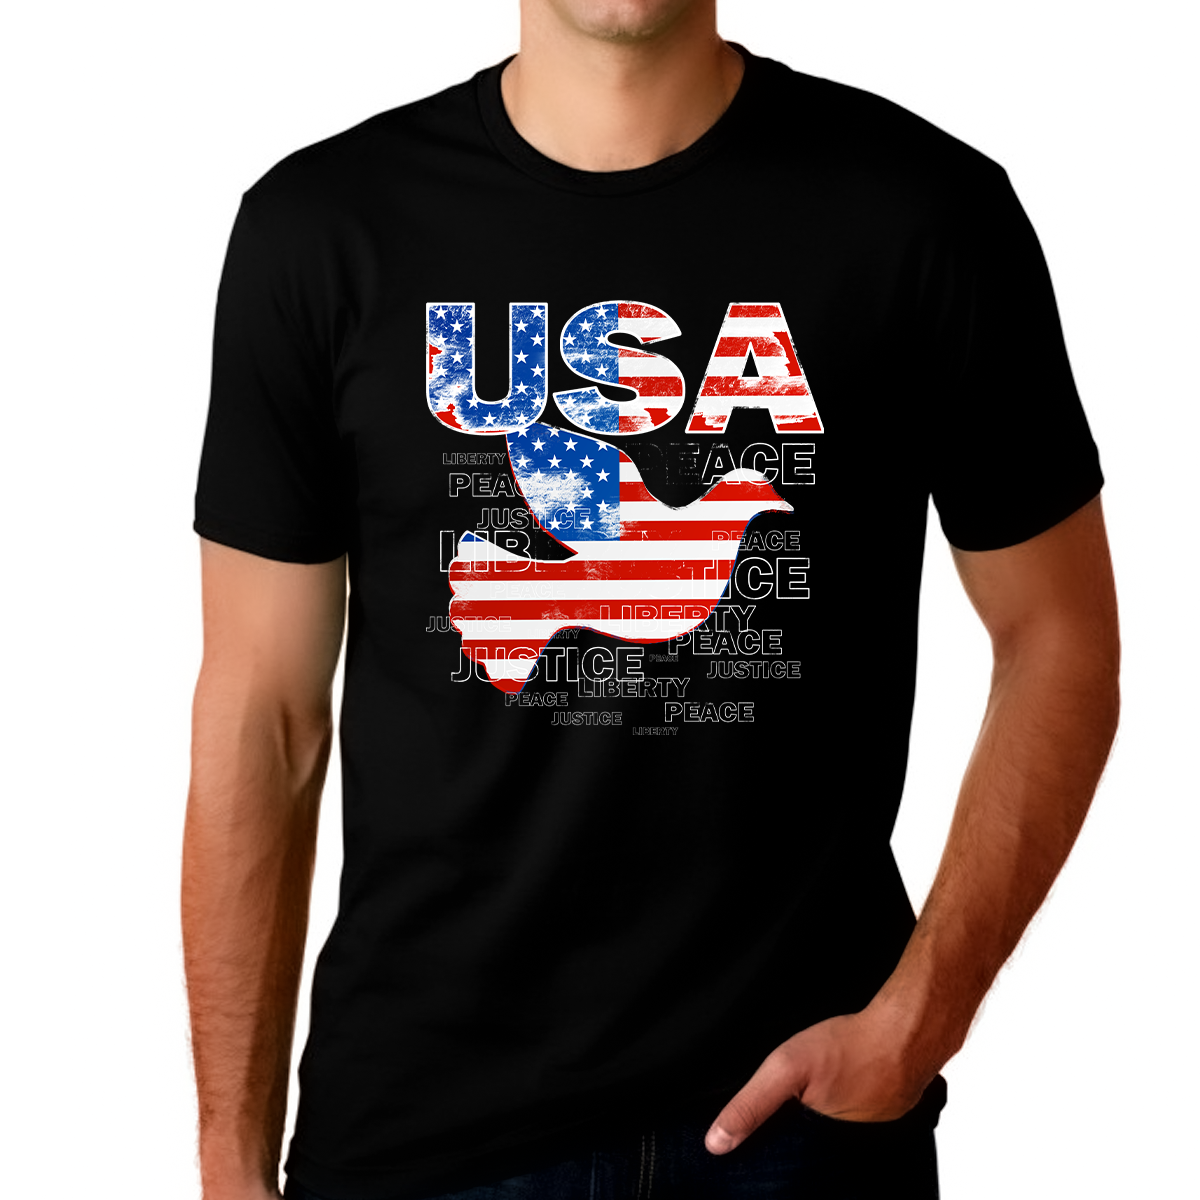 4th of July Shirts for Men USA Shirt Patriotic Shirts for Men Peace Dove US Flag American Flag Shirt - Fire Fit Designs